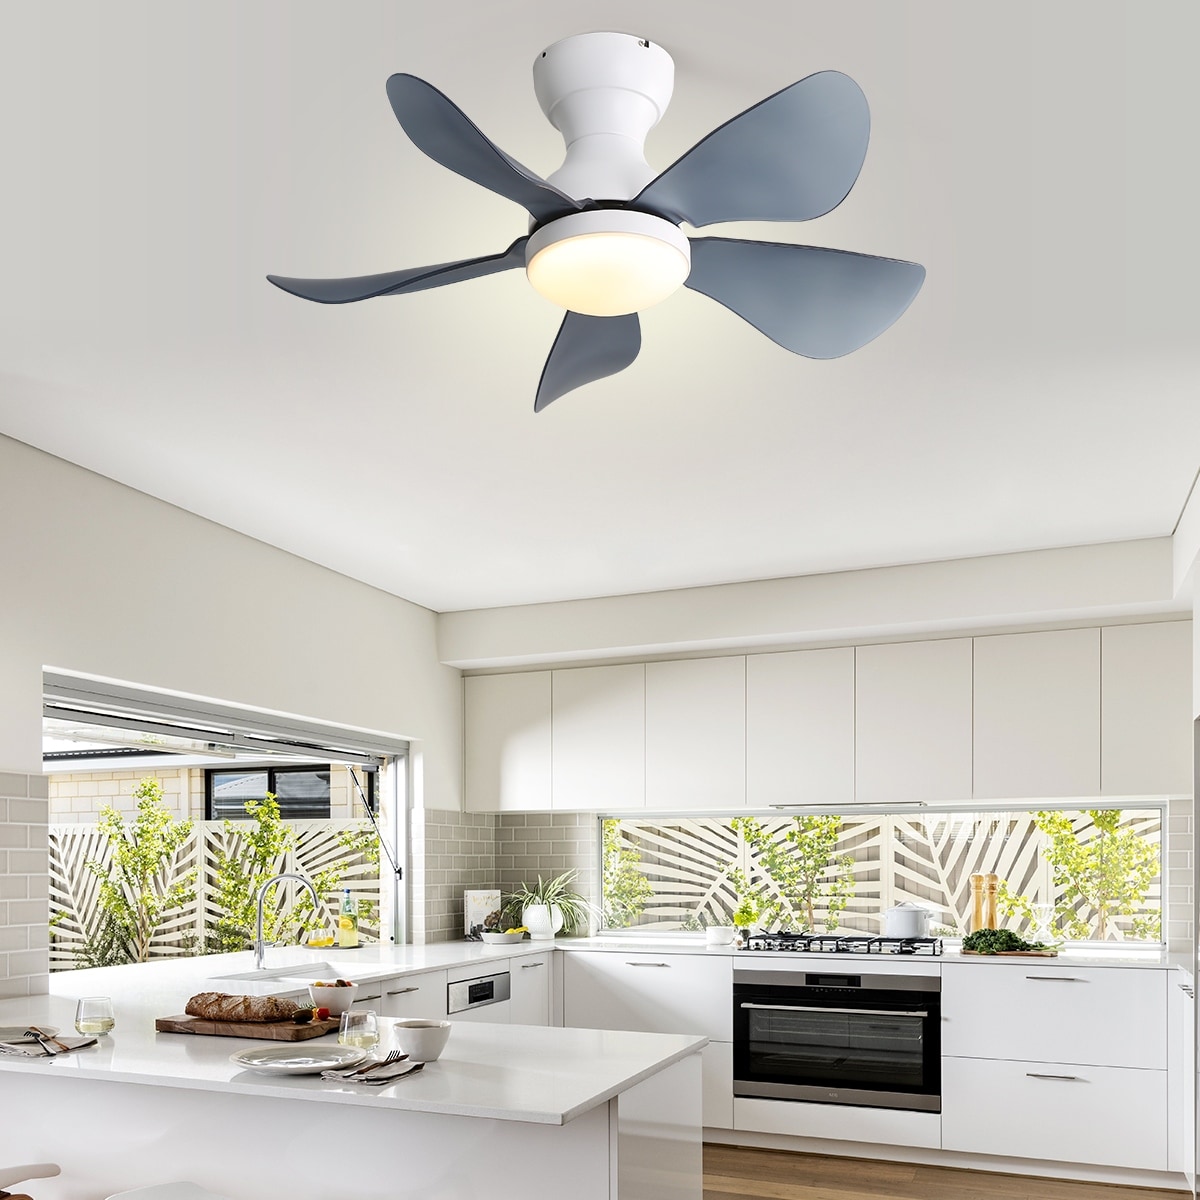 22/23/29 Flush Mount Ceiling Fan with Light and Remote Control